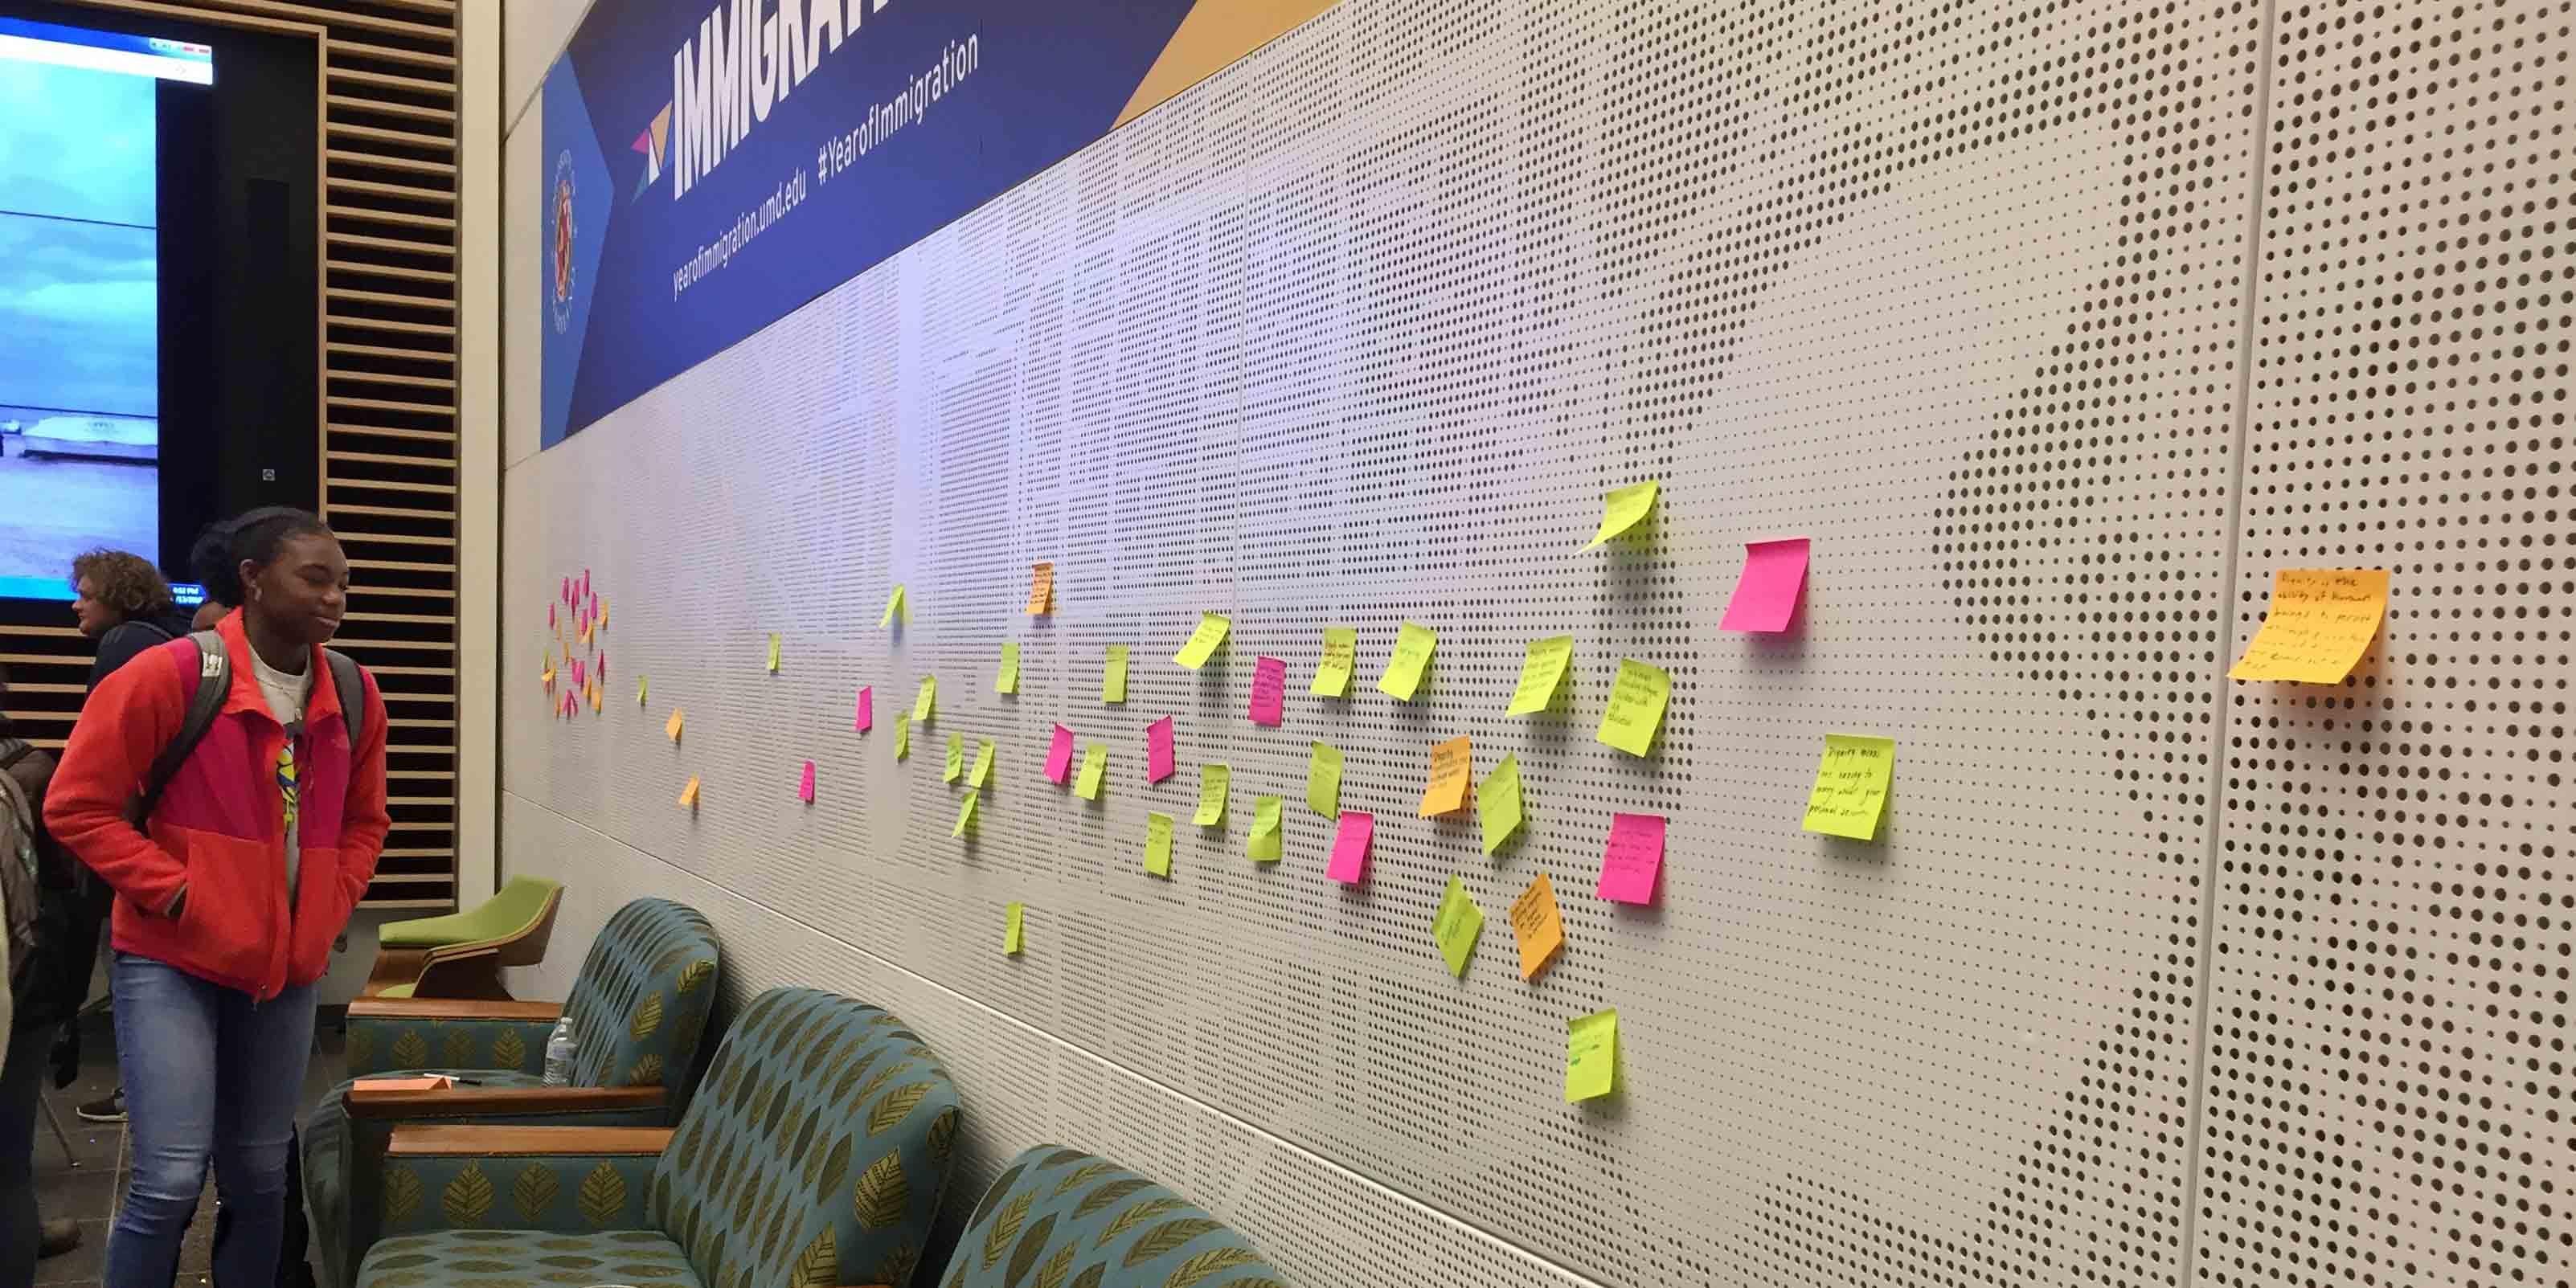 Post-it notes on a white board